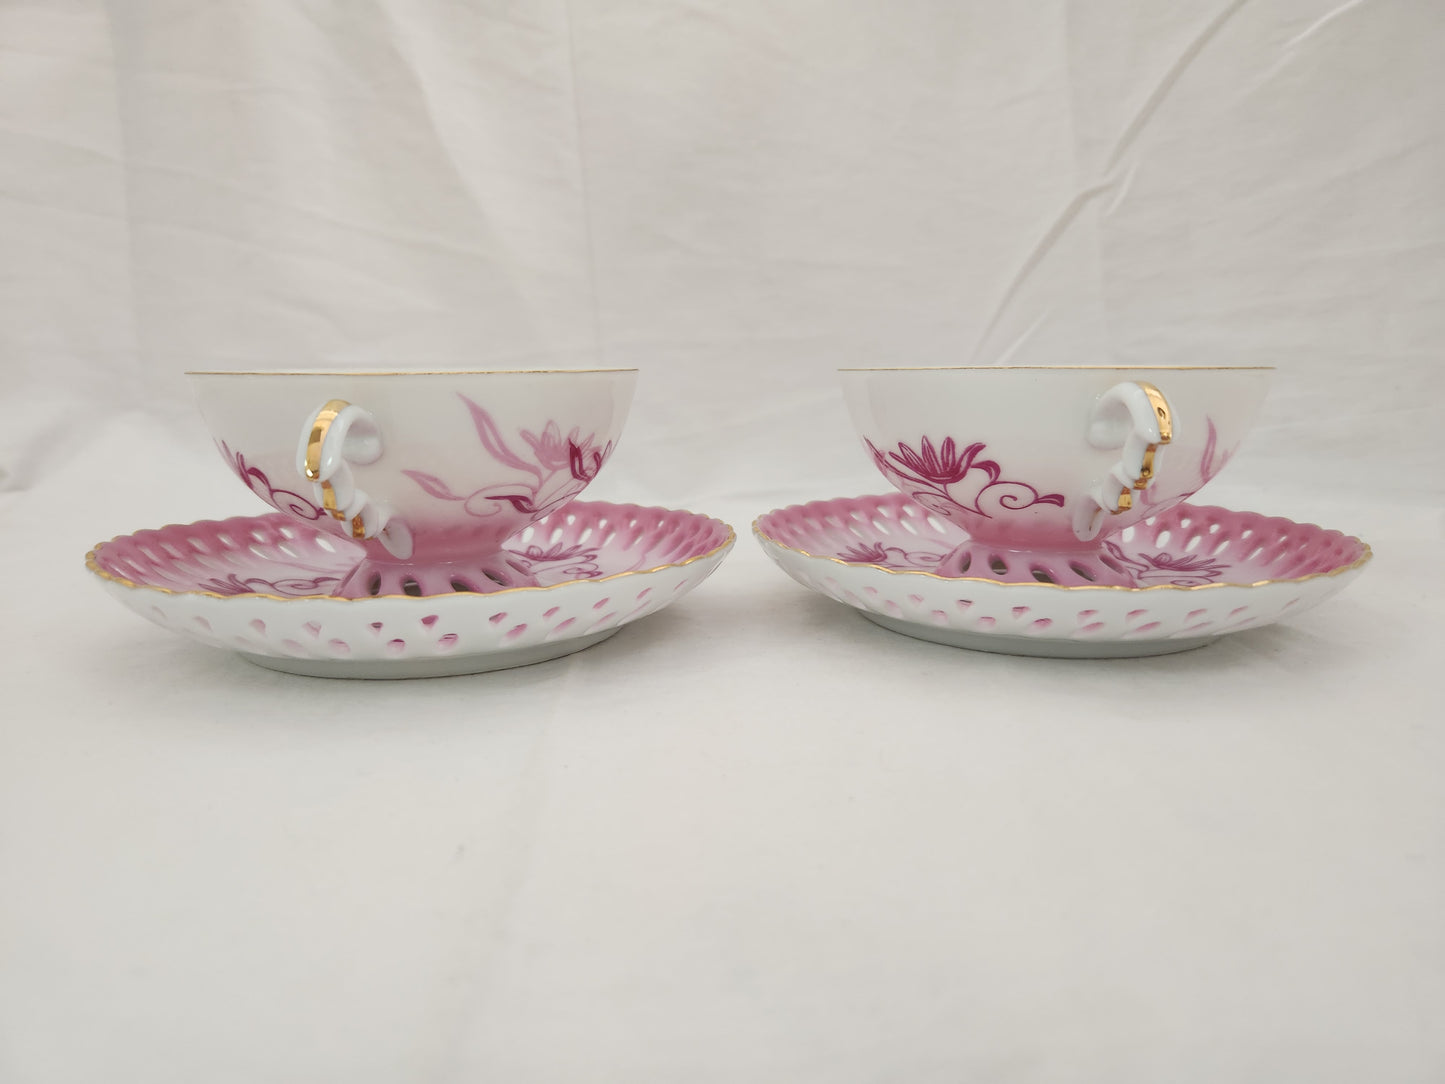 RARE - "Mano" Pink Floral Footed Tea Cup & Open Edge Saucer made in Occupied Japan - Set of 2